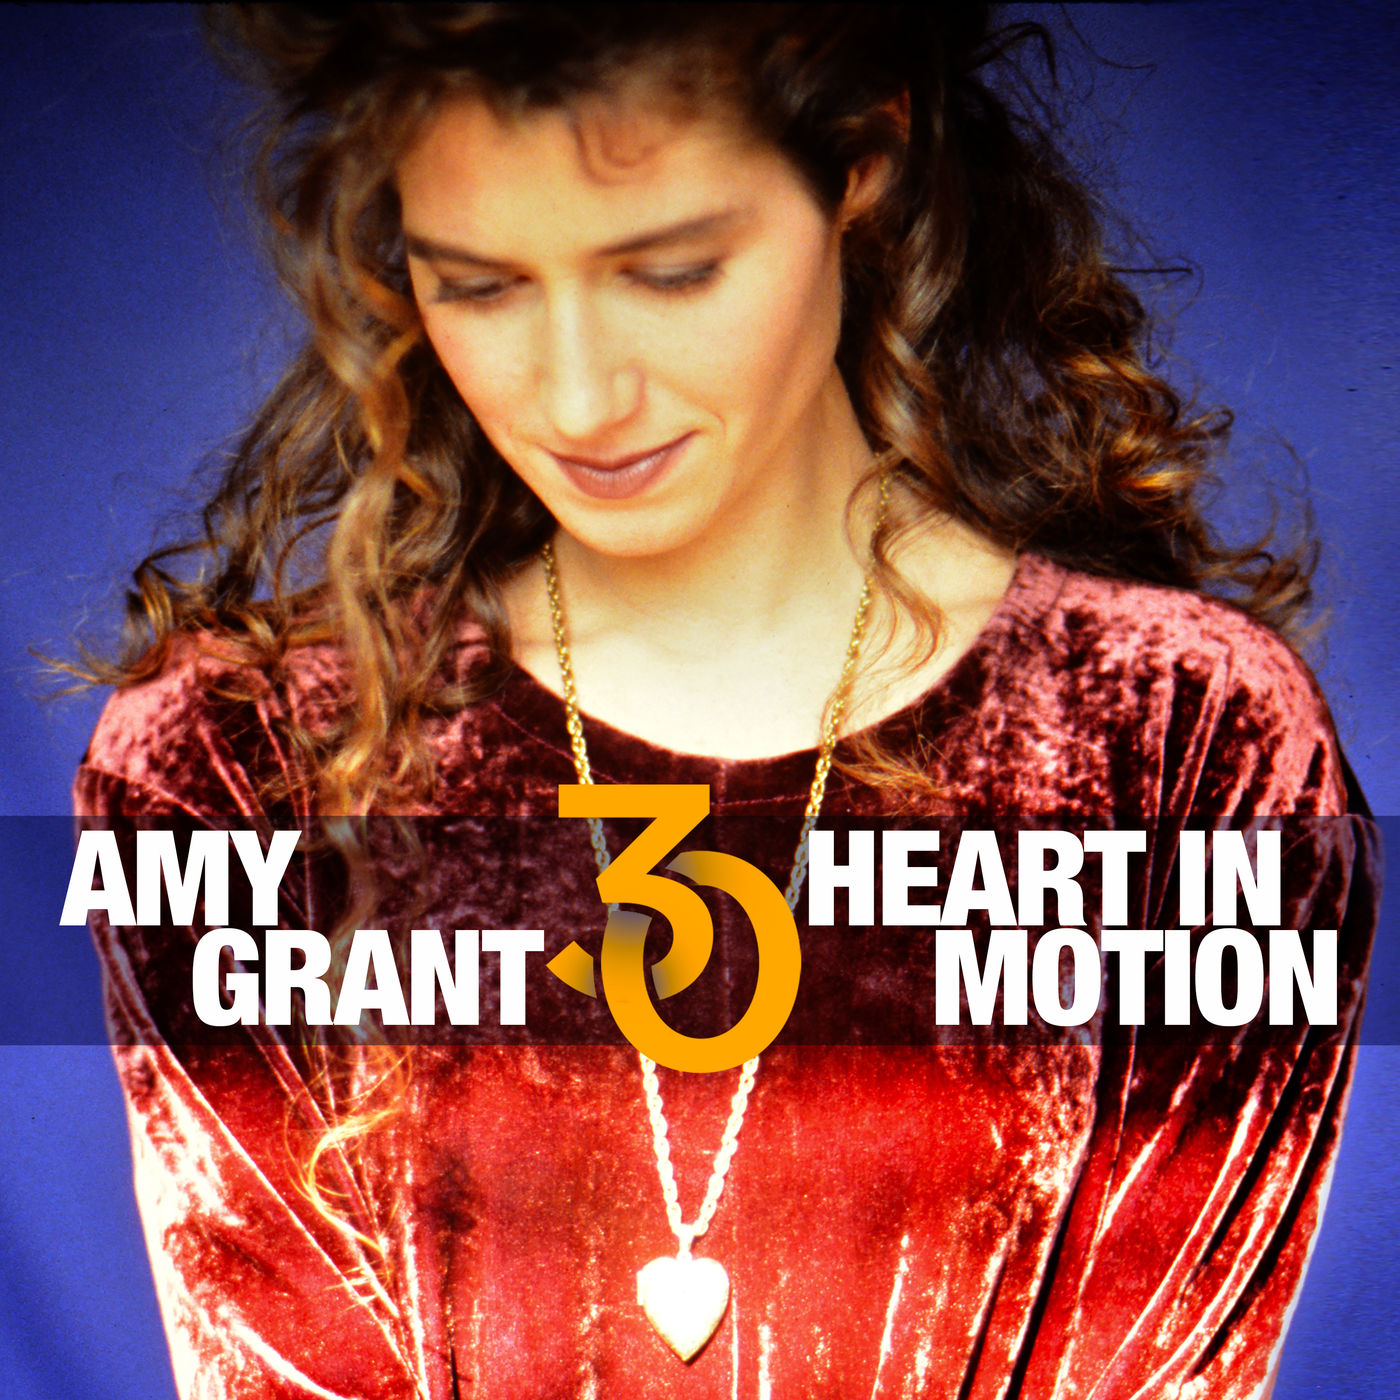 Amy Grant – Heart In Motion (30th Anniversary Edition) (1991/2021) [FLAC 24bit/44,1kHz]